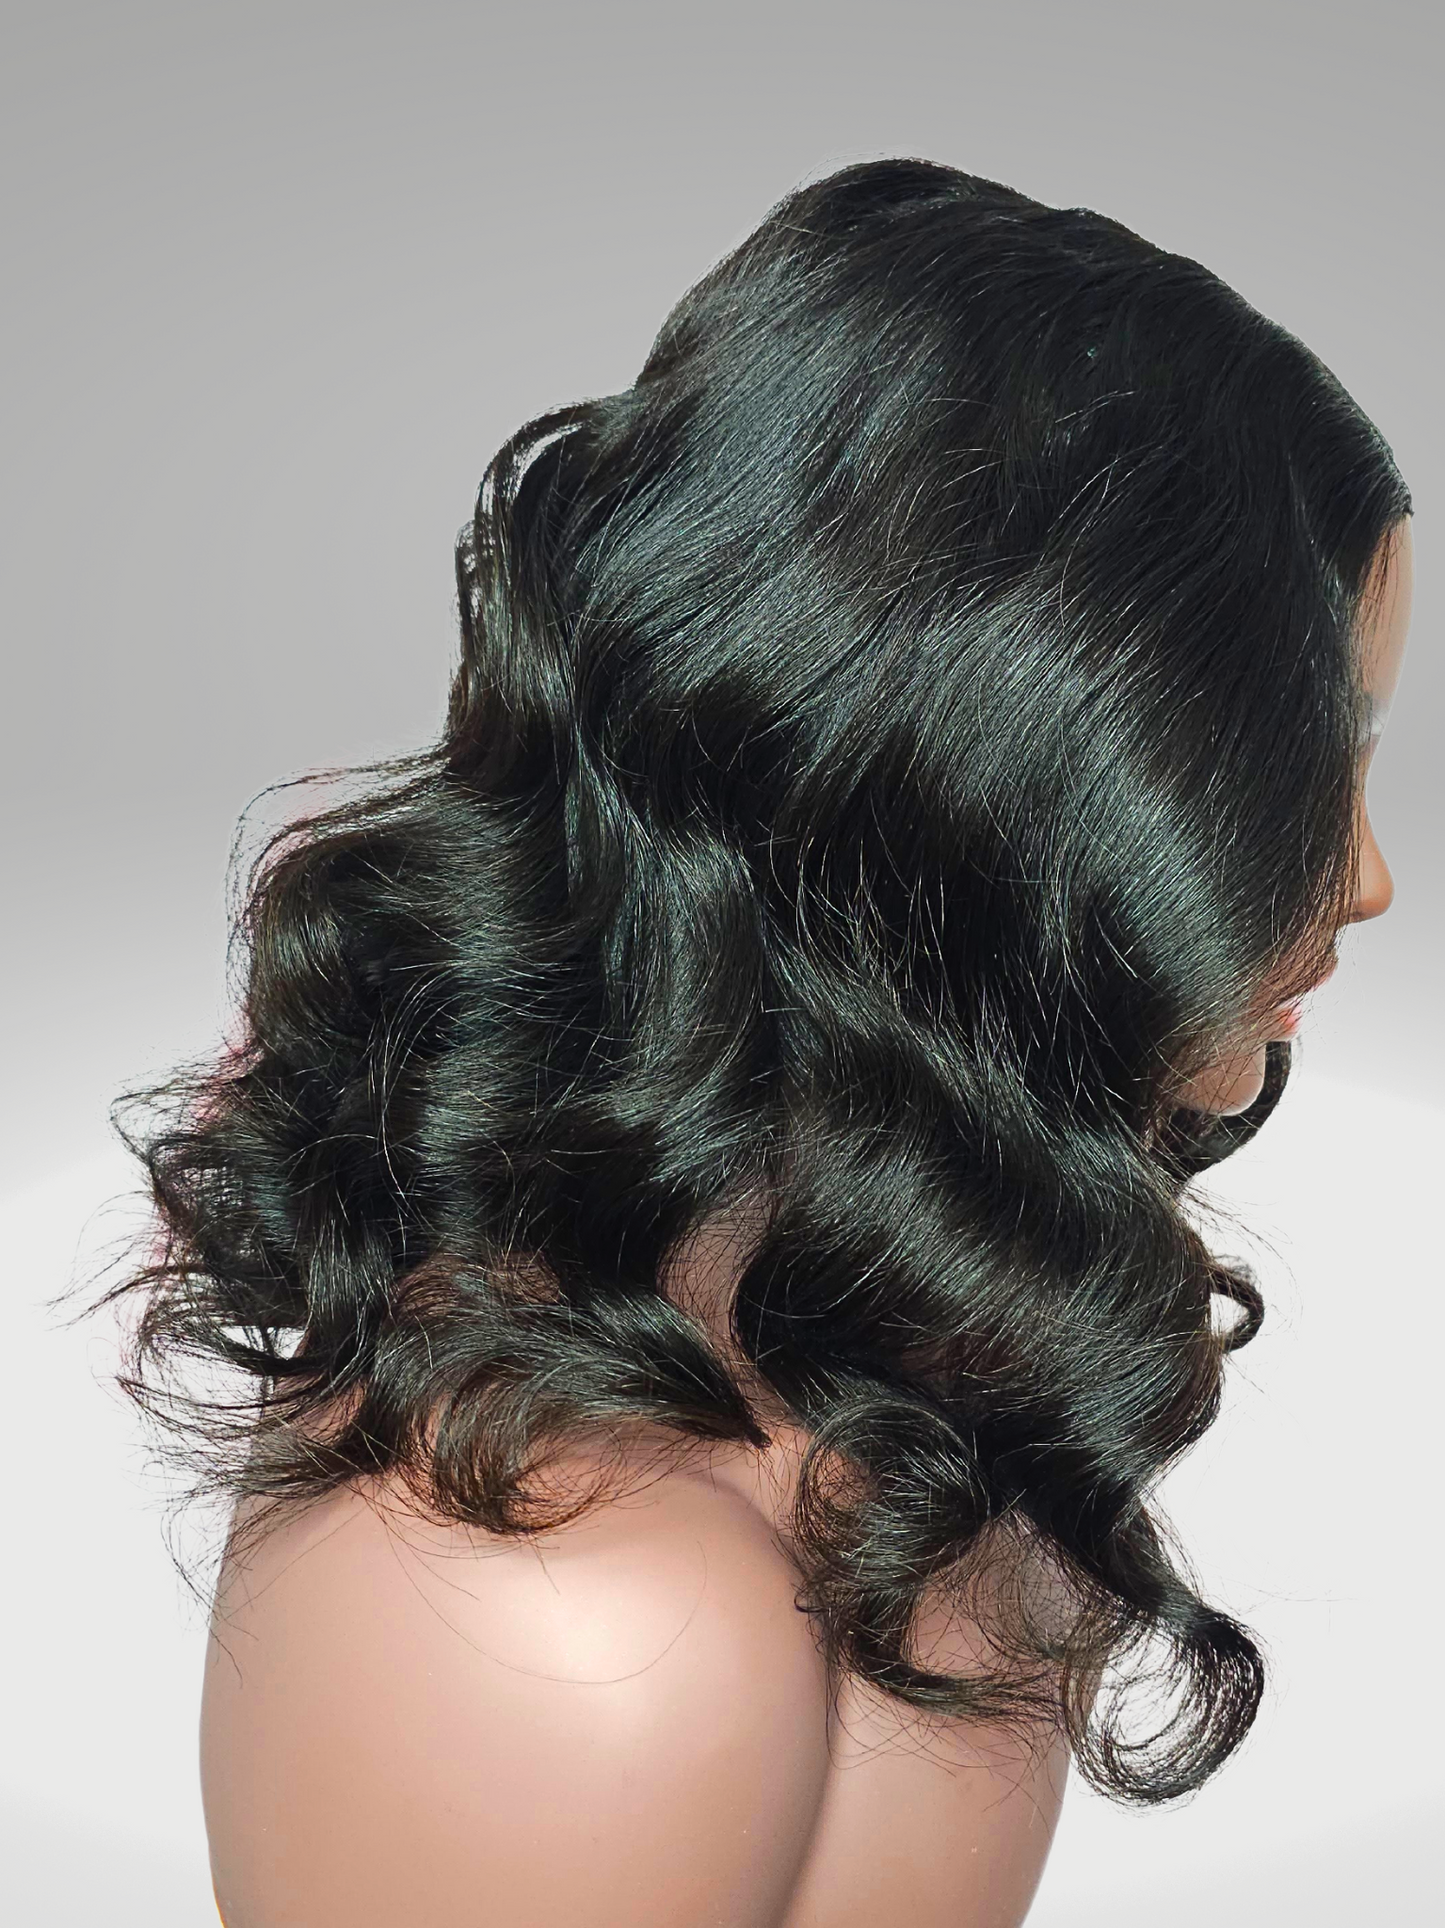 A stunning image of the Virgin Hair U-Part Divine Body Wave Wig, showcasing its luxurious body wave texture and natural sheen. The wig is displayed elegantly, highlighting the seamless U-Part design and the voluminous, bouncy waves that epitomize effortless glamour and versatility. Perfectly suited for those seeking a natural and sophisticated hair transformation.